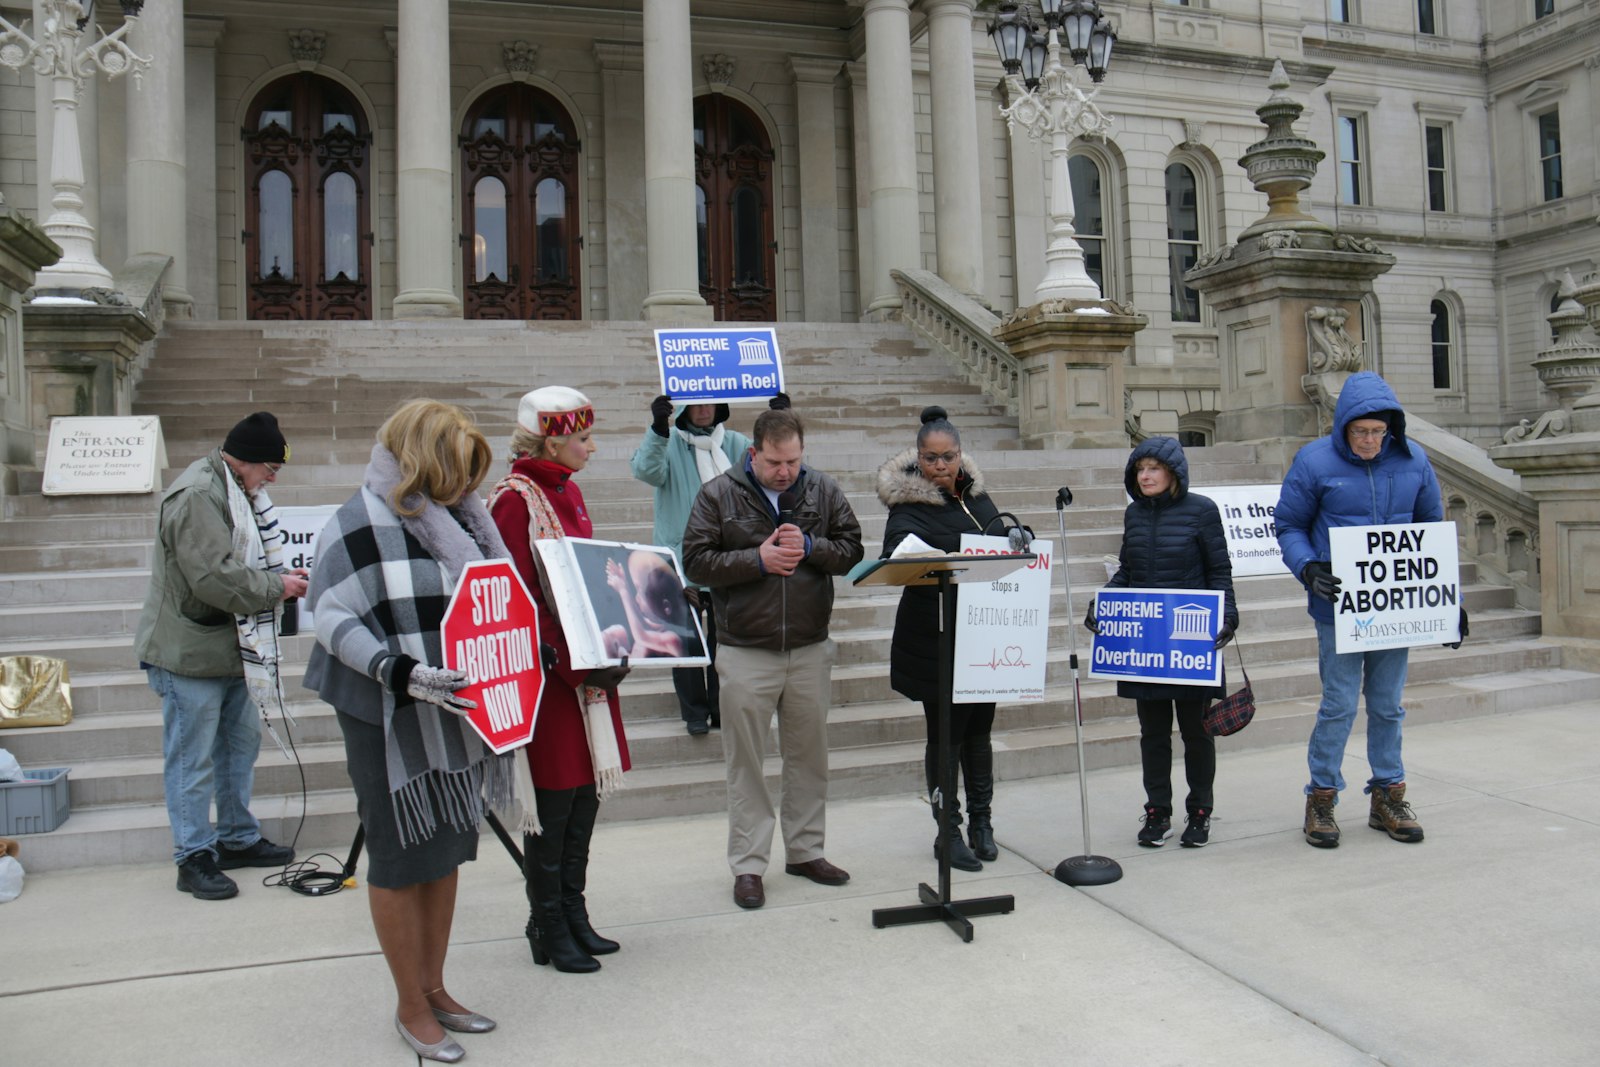 Demonstrators gathered at the Michigan Capitol on Nov. 30, campaigning for life. The Mississippi v. Jackson Women’s Health Center case in the U.S. Supreme Court is seen as an opportunity to reverse the 1973 Roe v. Wade decision.